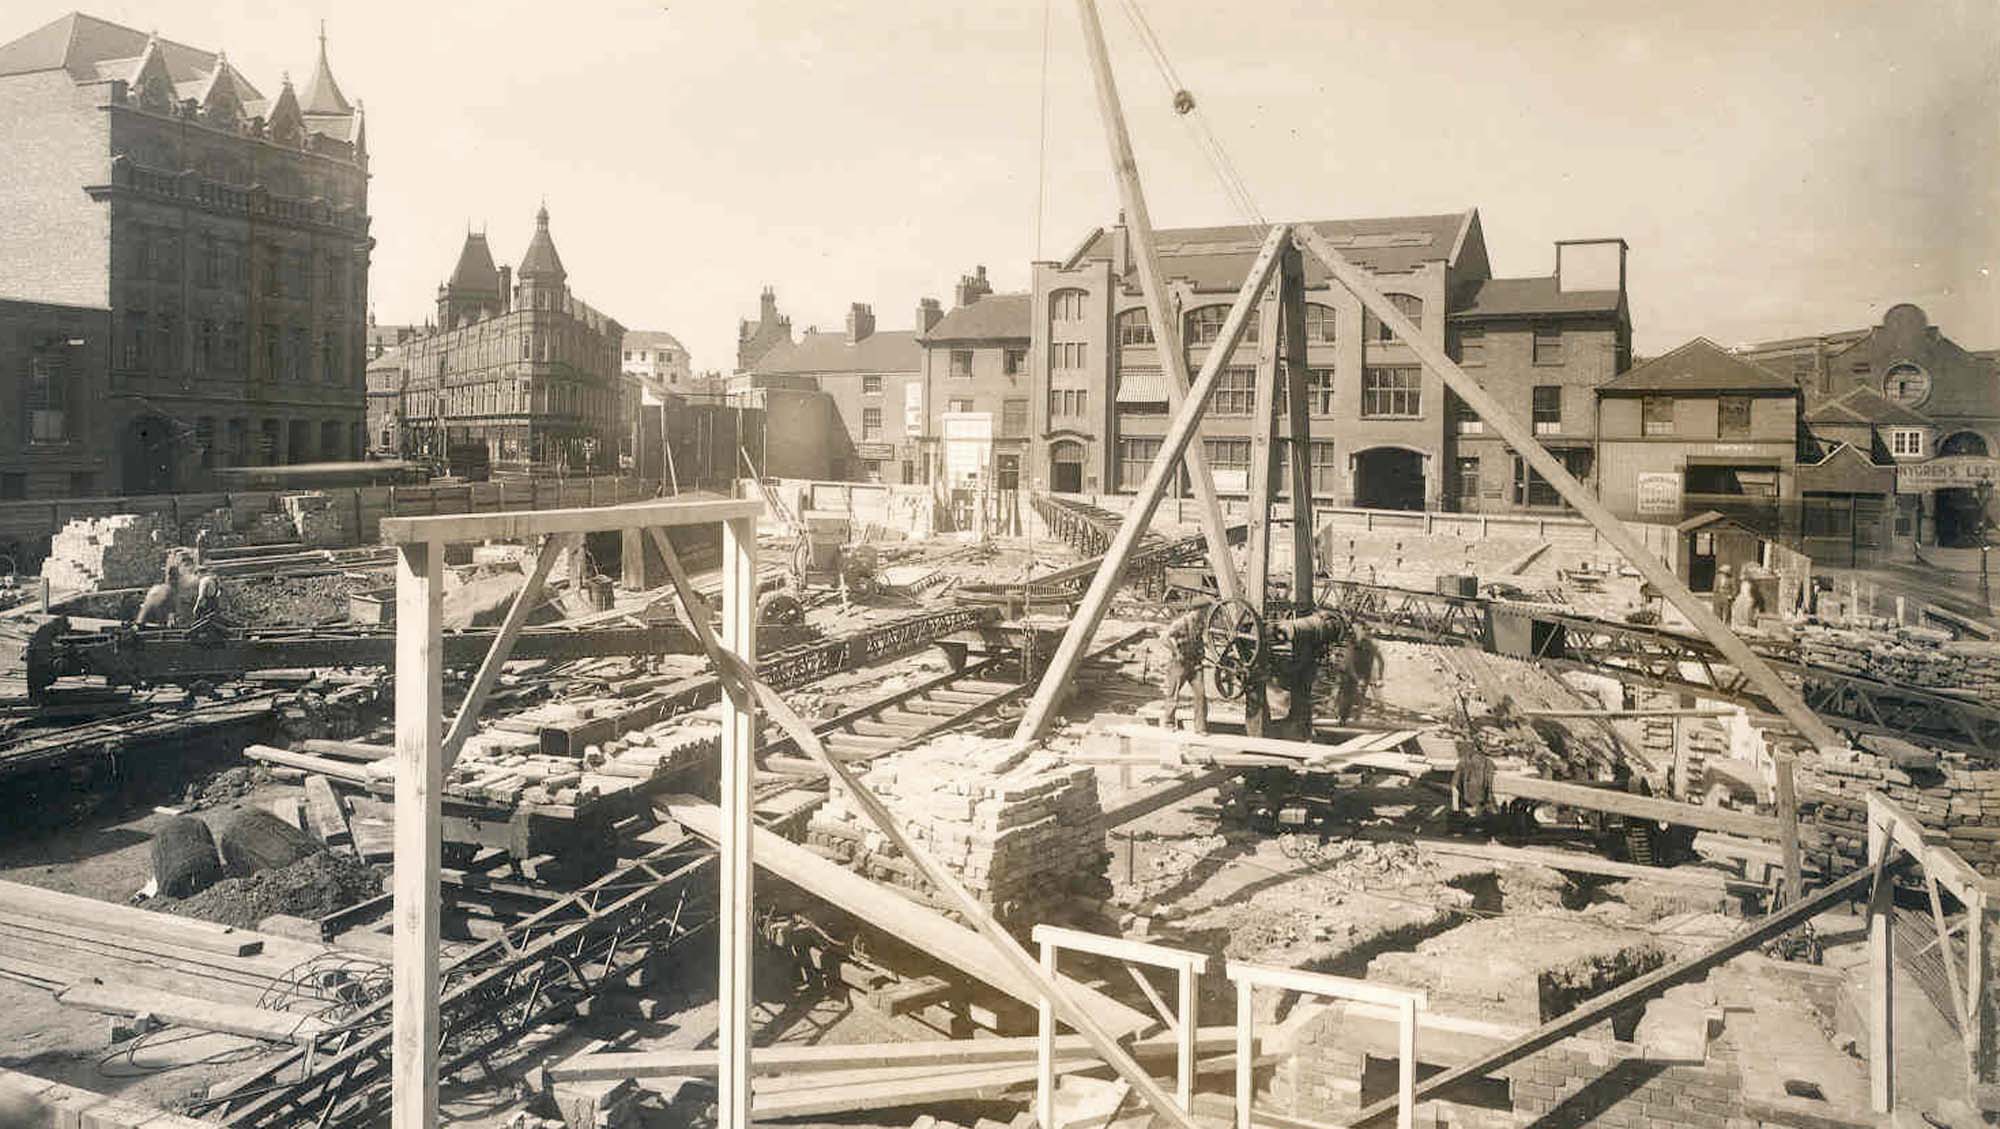 Looking across the Odeon Cinema construction site (1937) to the factory building that were replaced by the Curve -